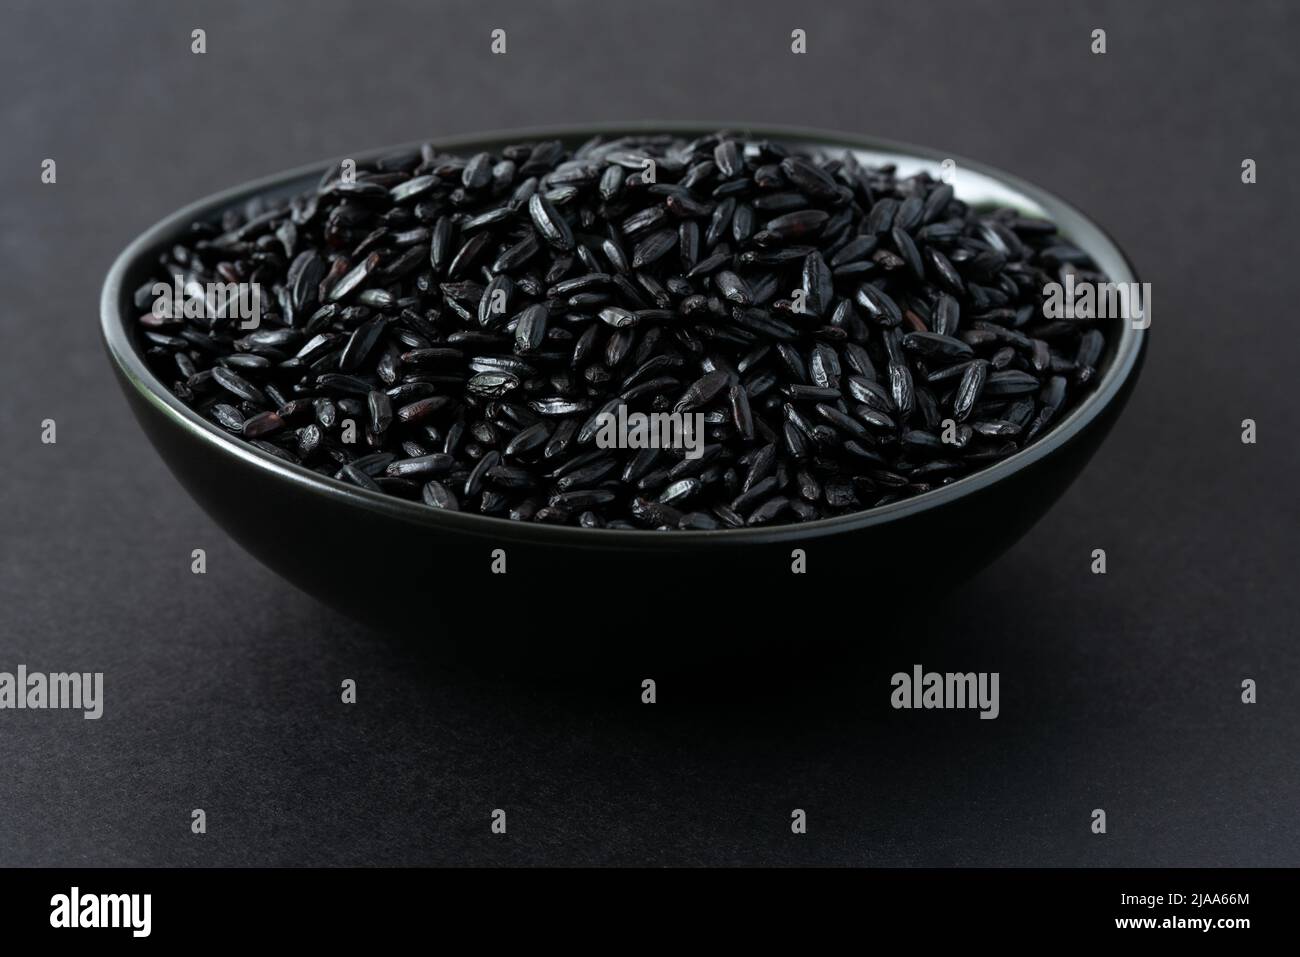 Uncooked Black Heirloom Rice in a Bowl Stock Photo